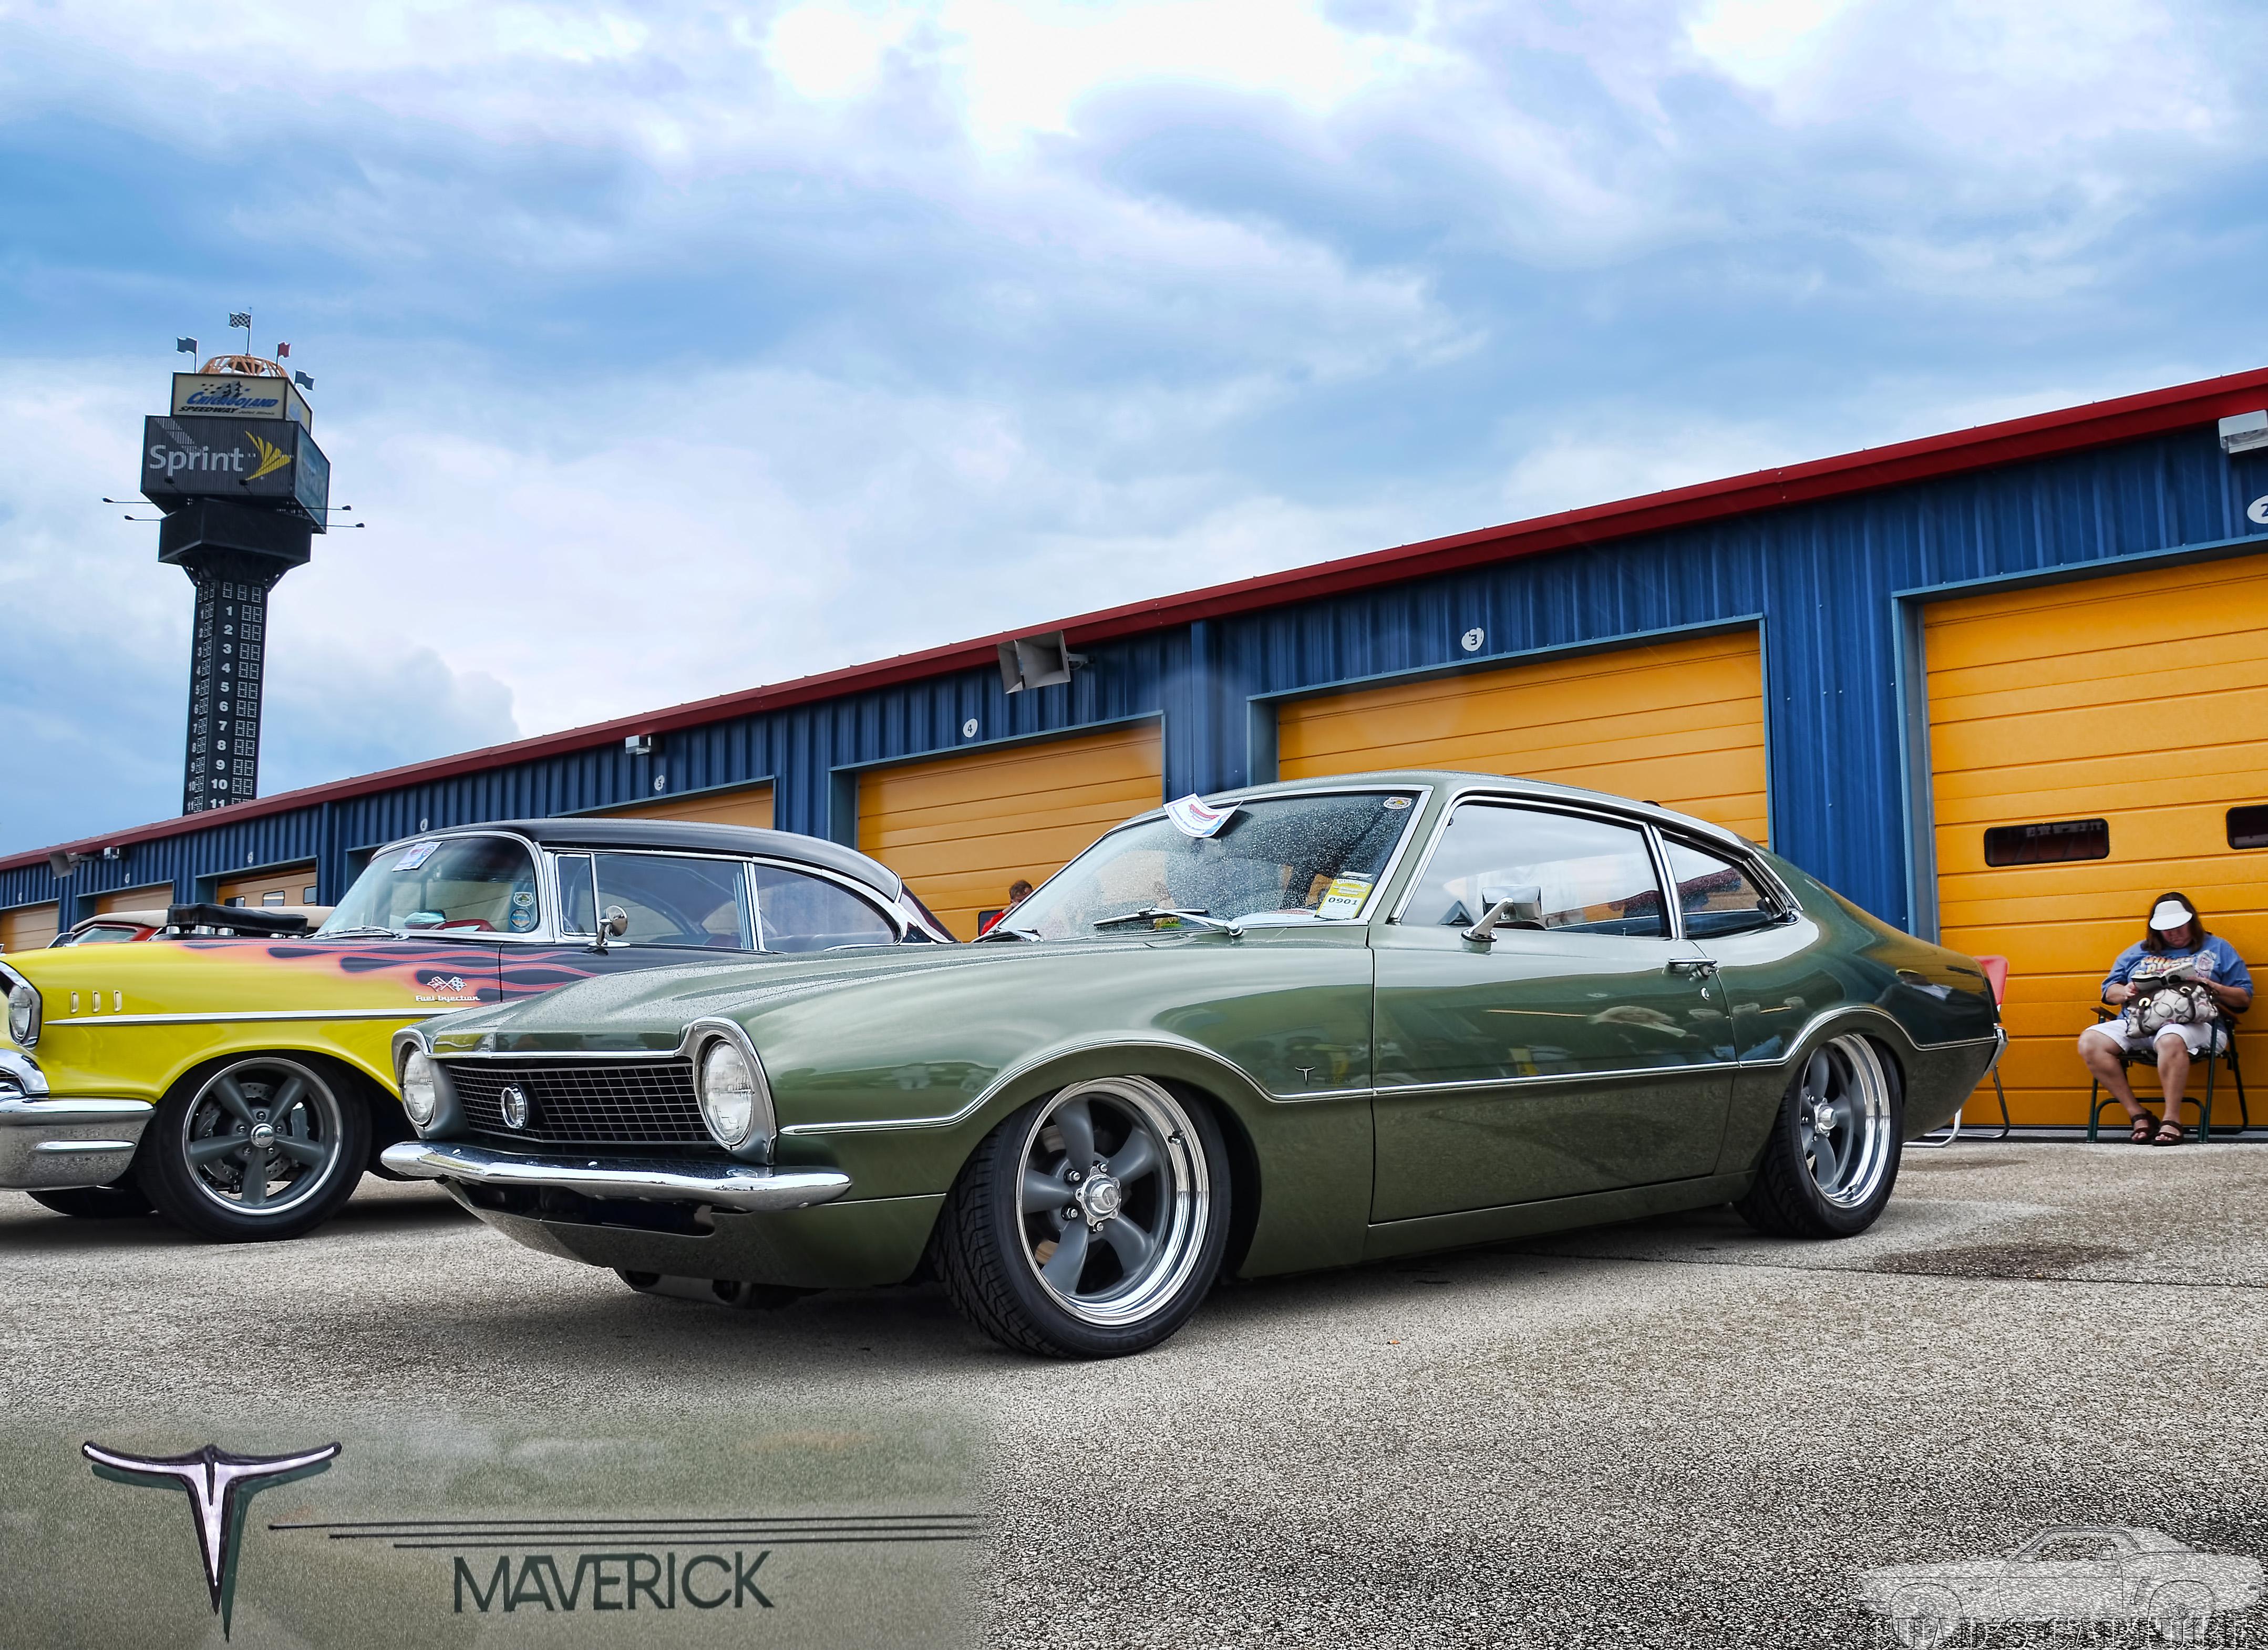 Ford Maverick wallpapers for desktop download free Ford Maverick pictures  and backgrounds for PC  moborg